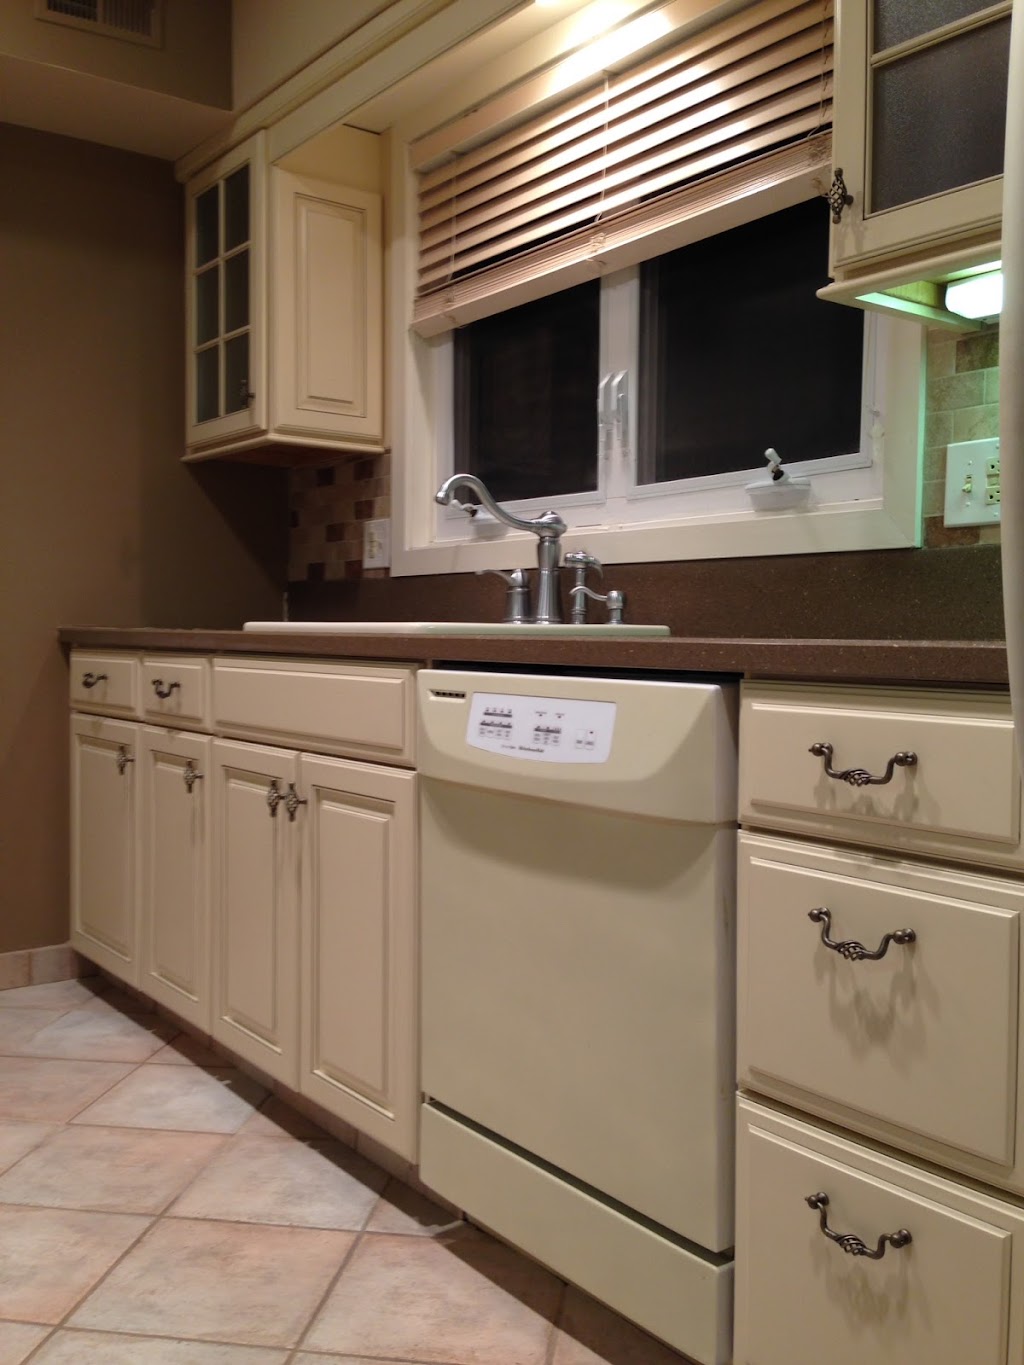 Zaccardo Cabinetry And Cabinet Refacing | 4662 Thelma Ave, Mays Landing, NJ 08330 | Phone: (609) 625-5954